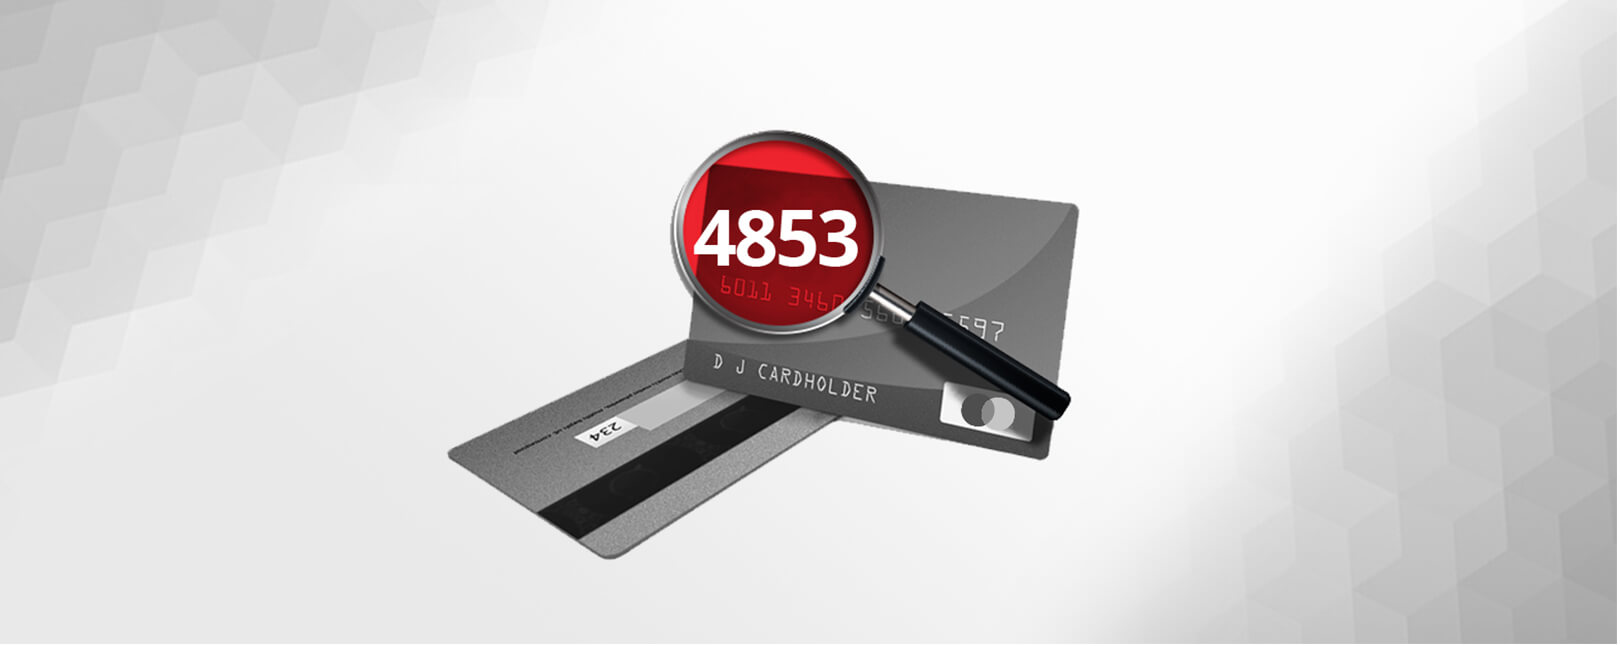 4853- Cardholder Dispute of a Recurring